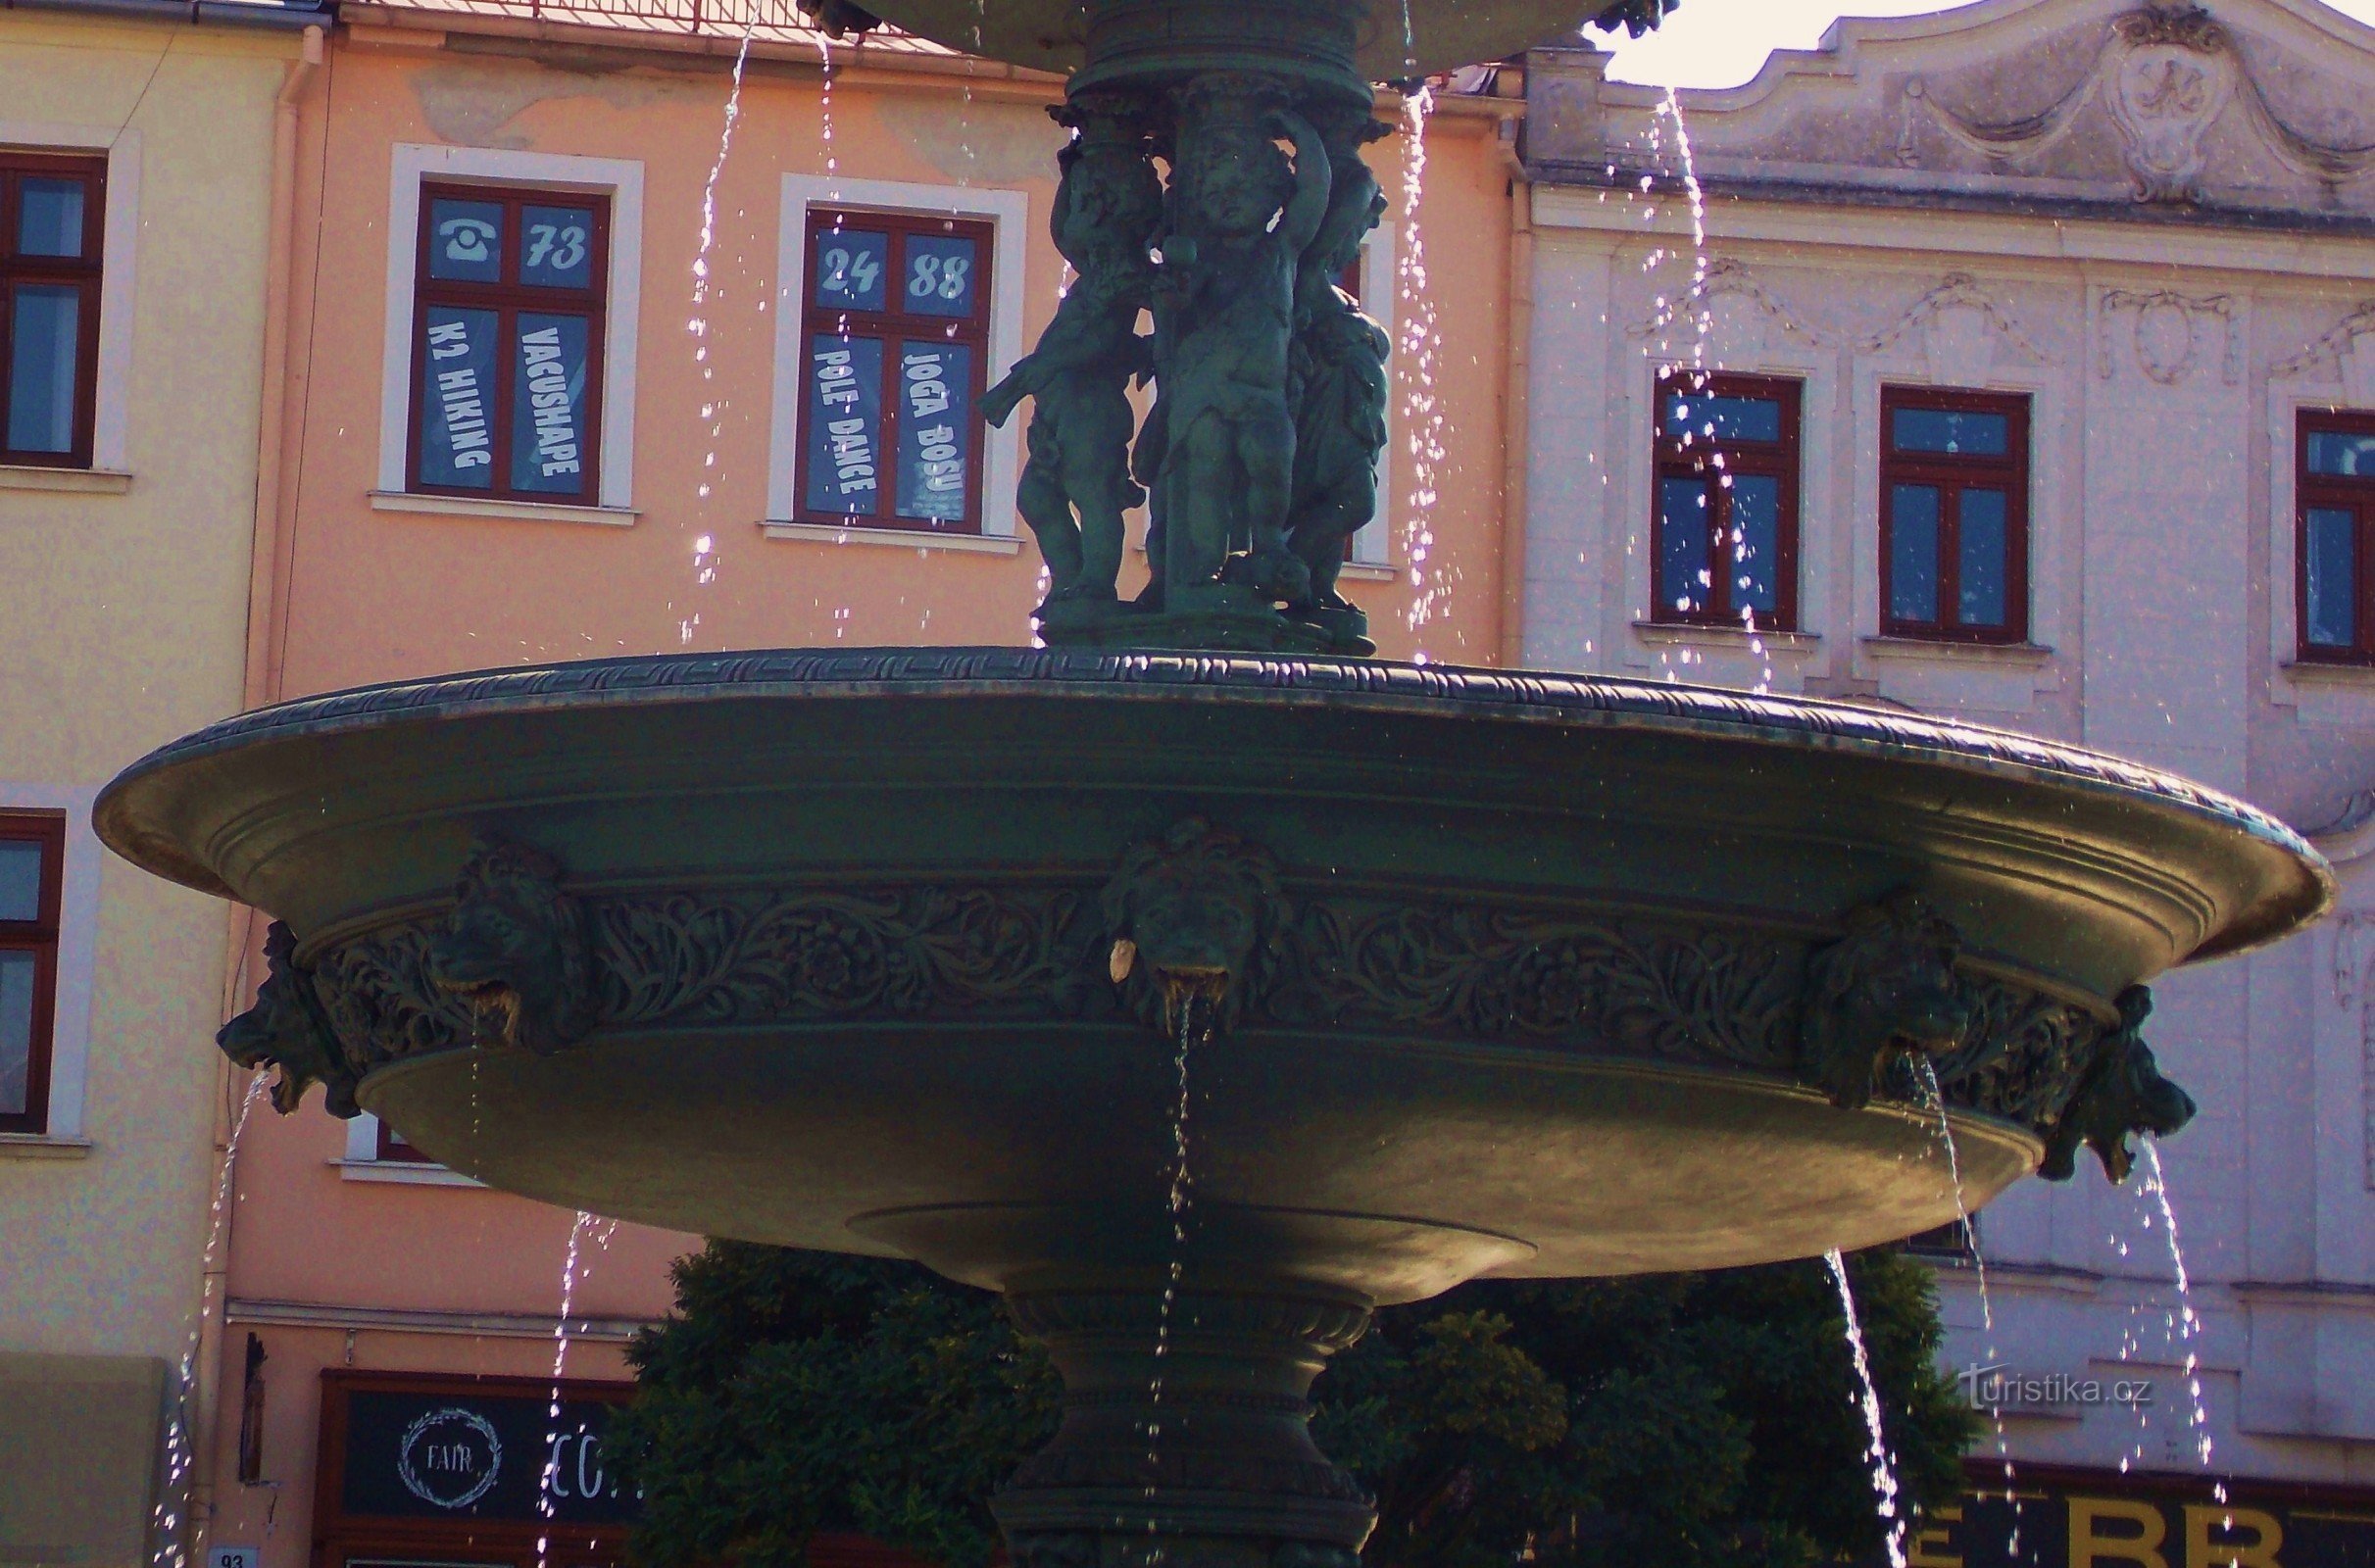 The fountain on Masaryk Square in Karviná